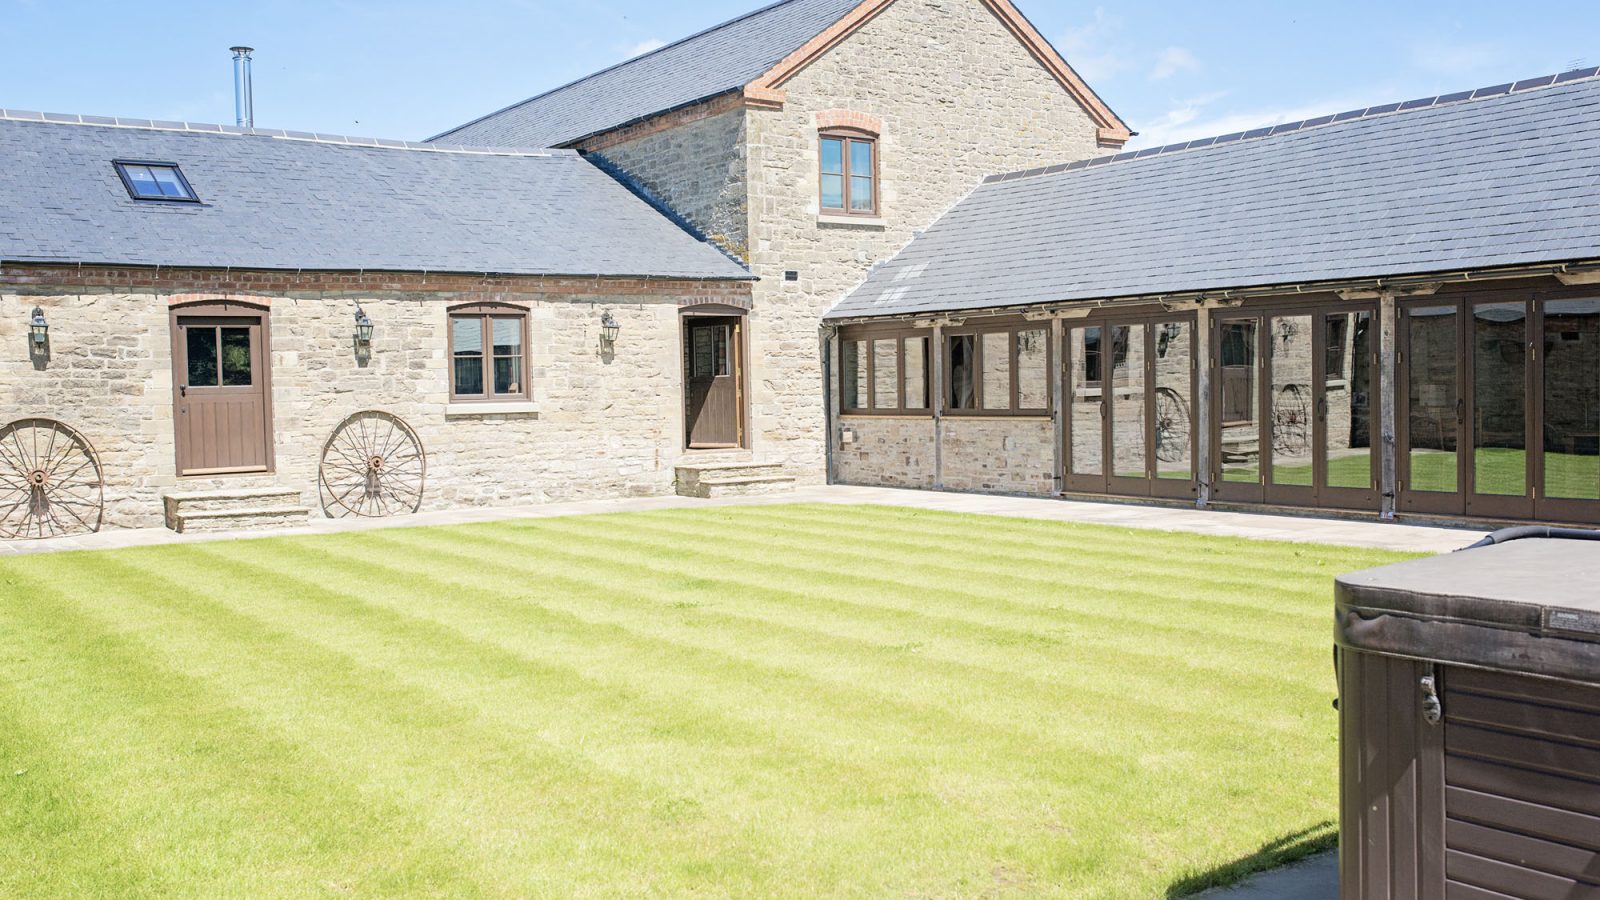  The Old Mill, Hayloft and Byre - kate & tom's Large Holiday Homes